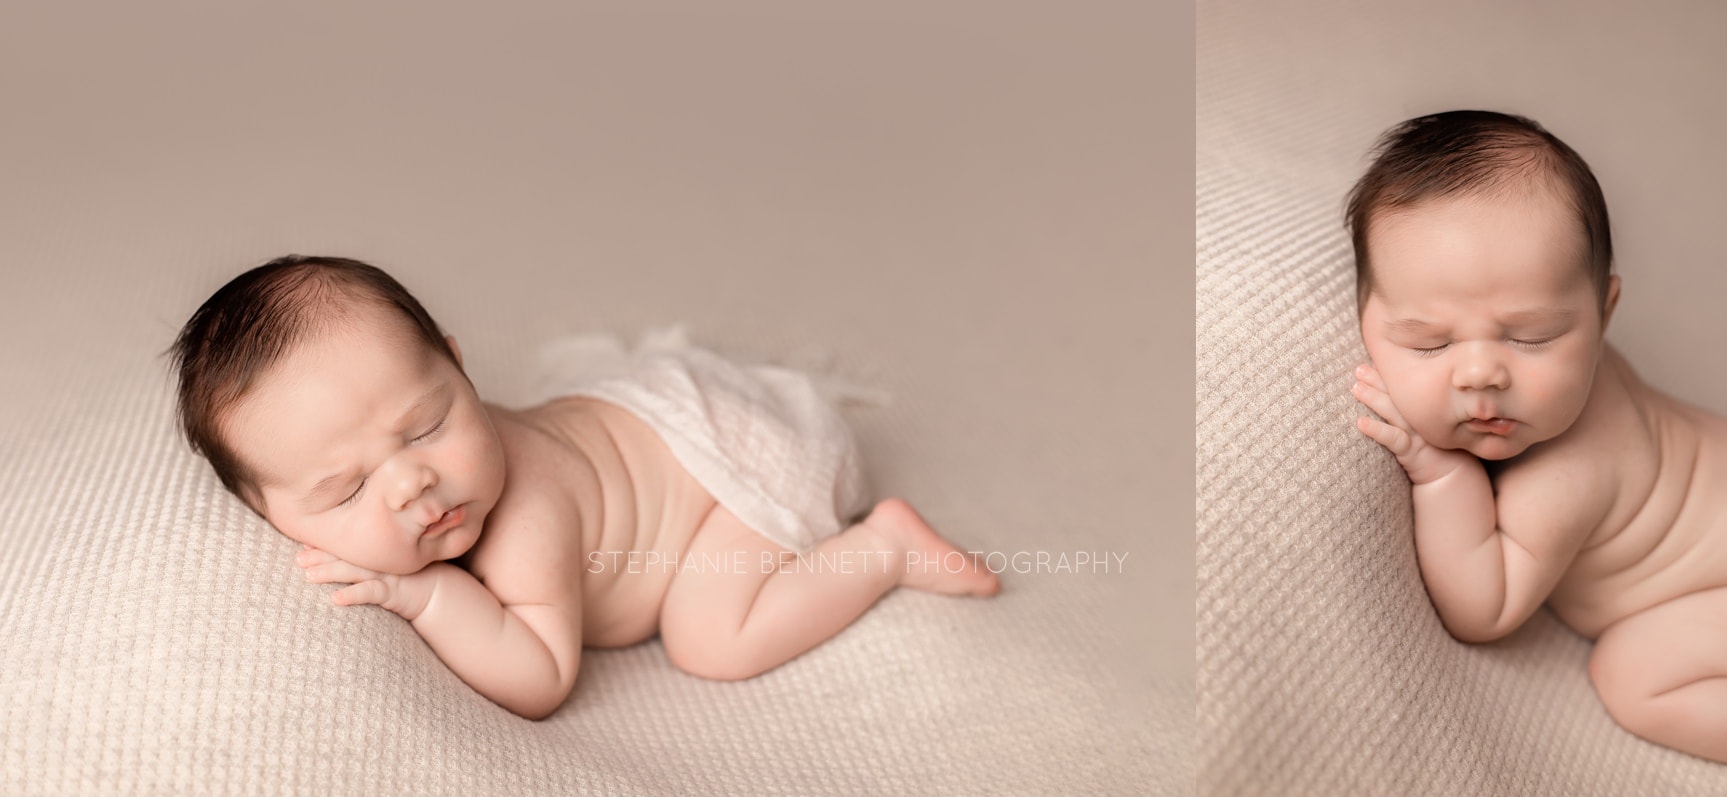 Online Fabric Stores For Newborn Backdrops